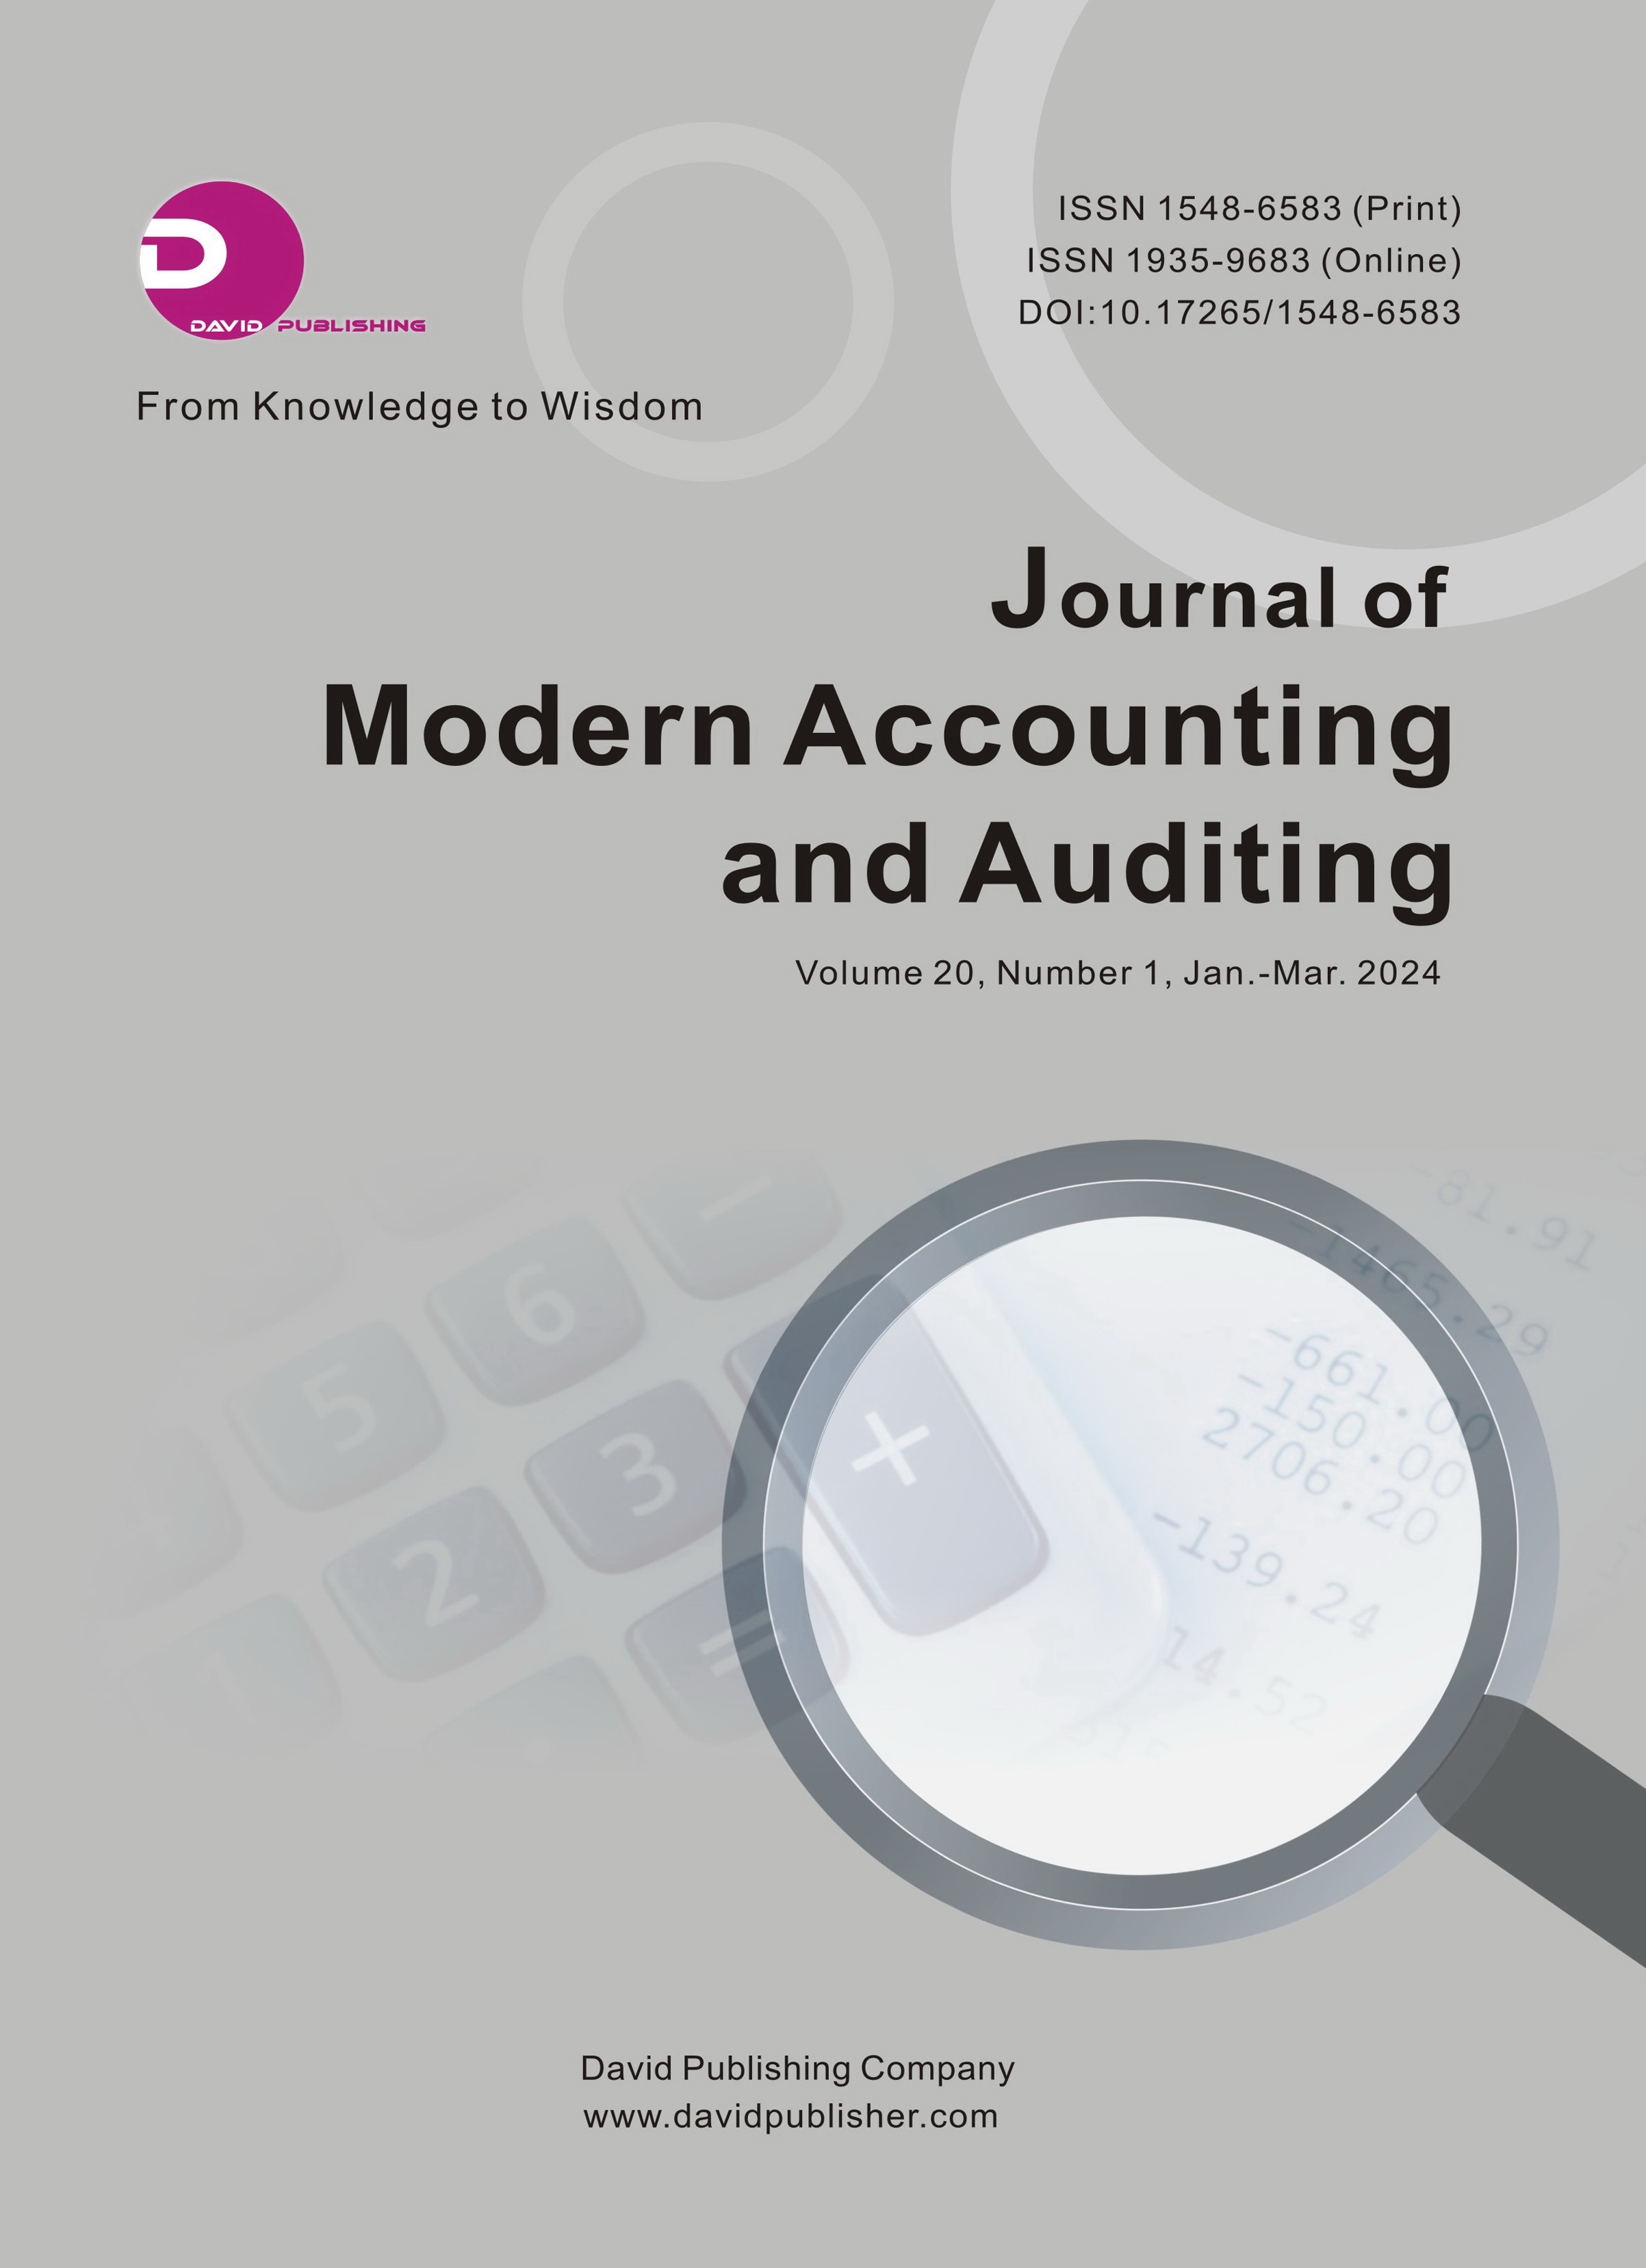 Journal of Modern Accounting and Auditing